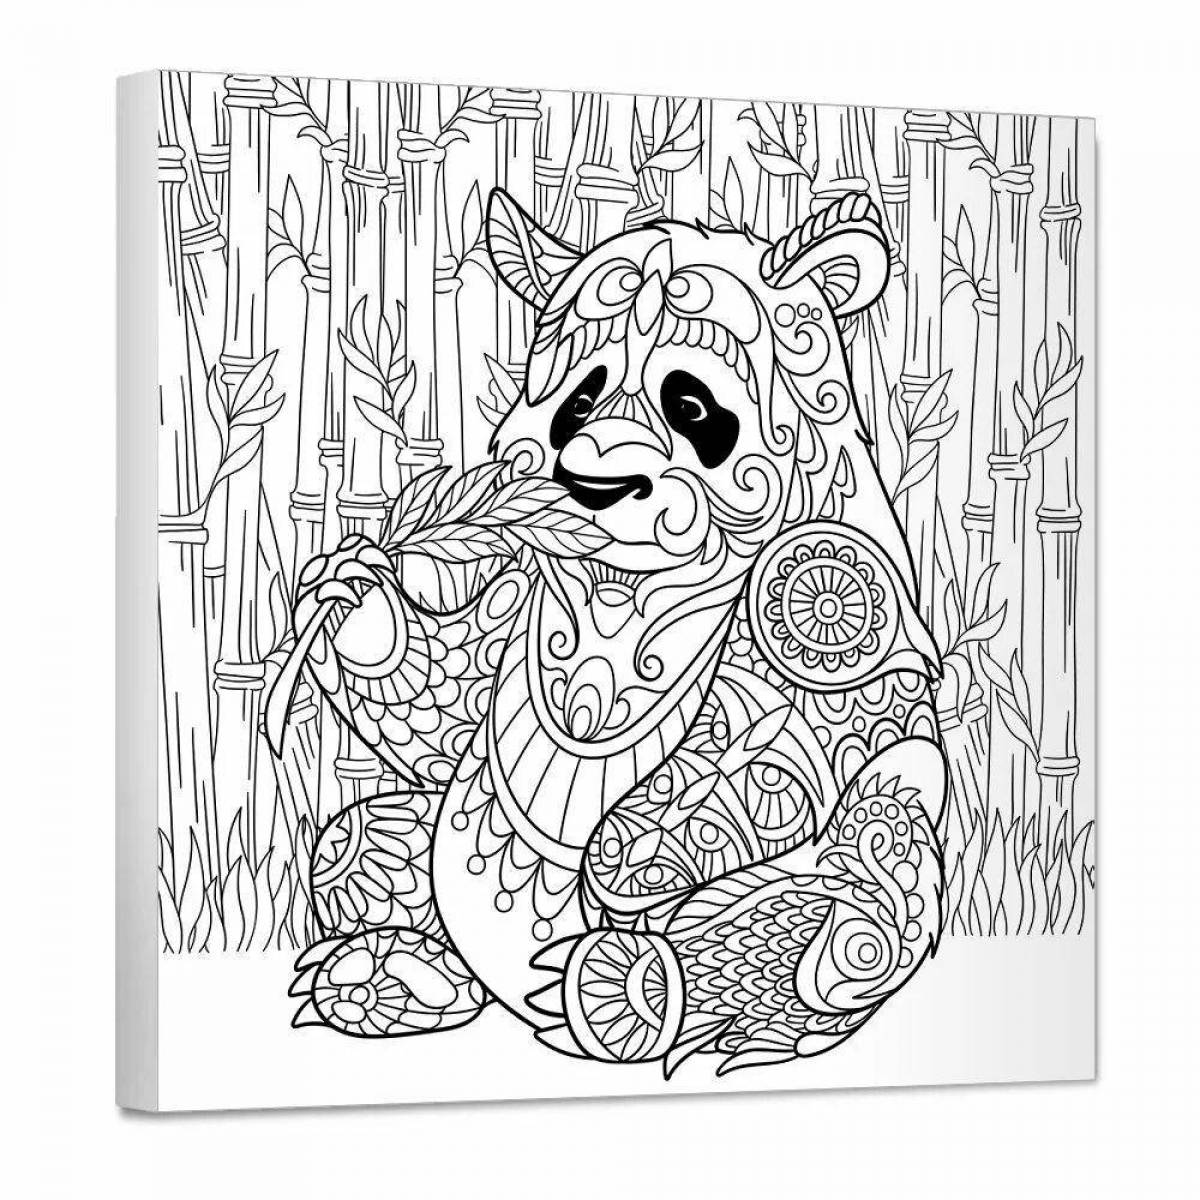 Surprise colorful coloring book create a coloring page from a picture